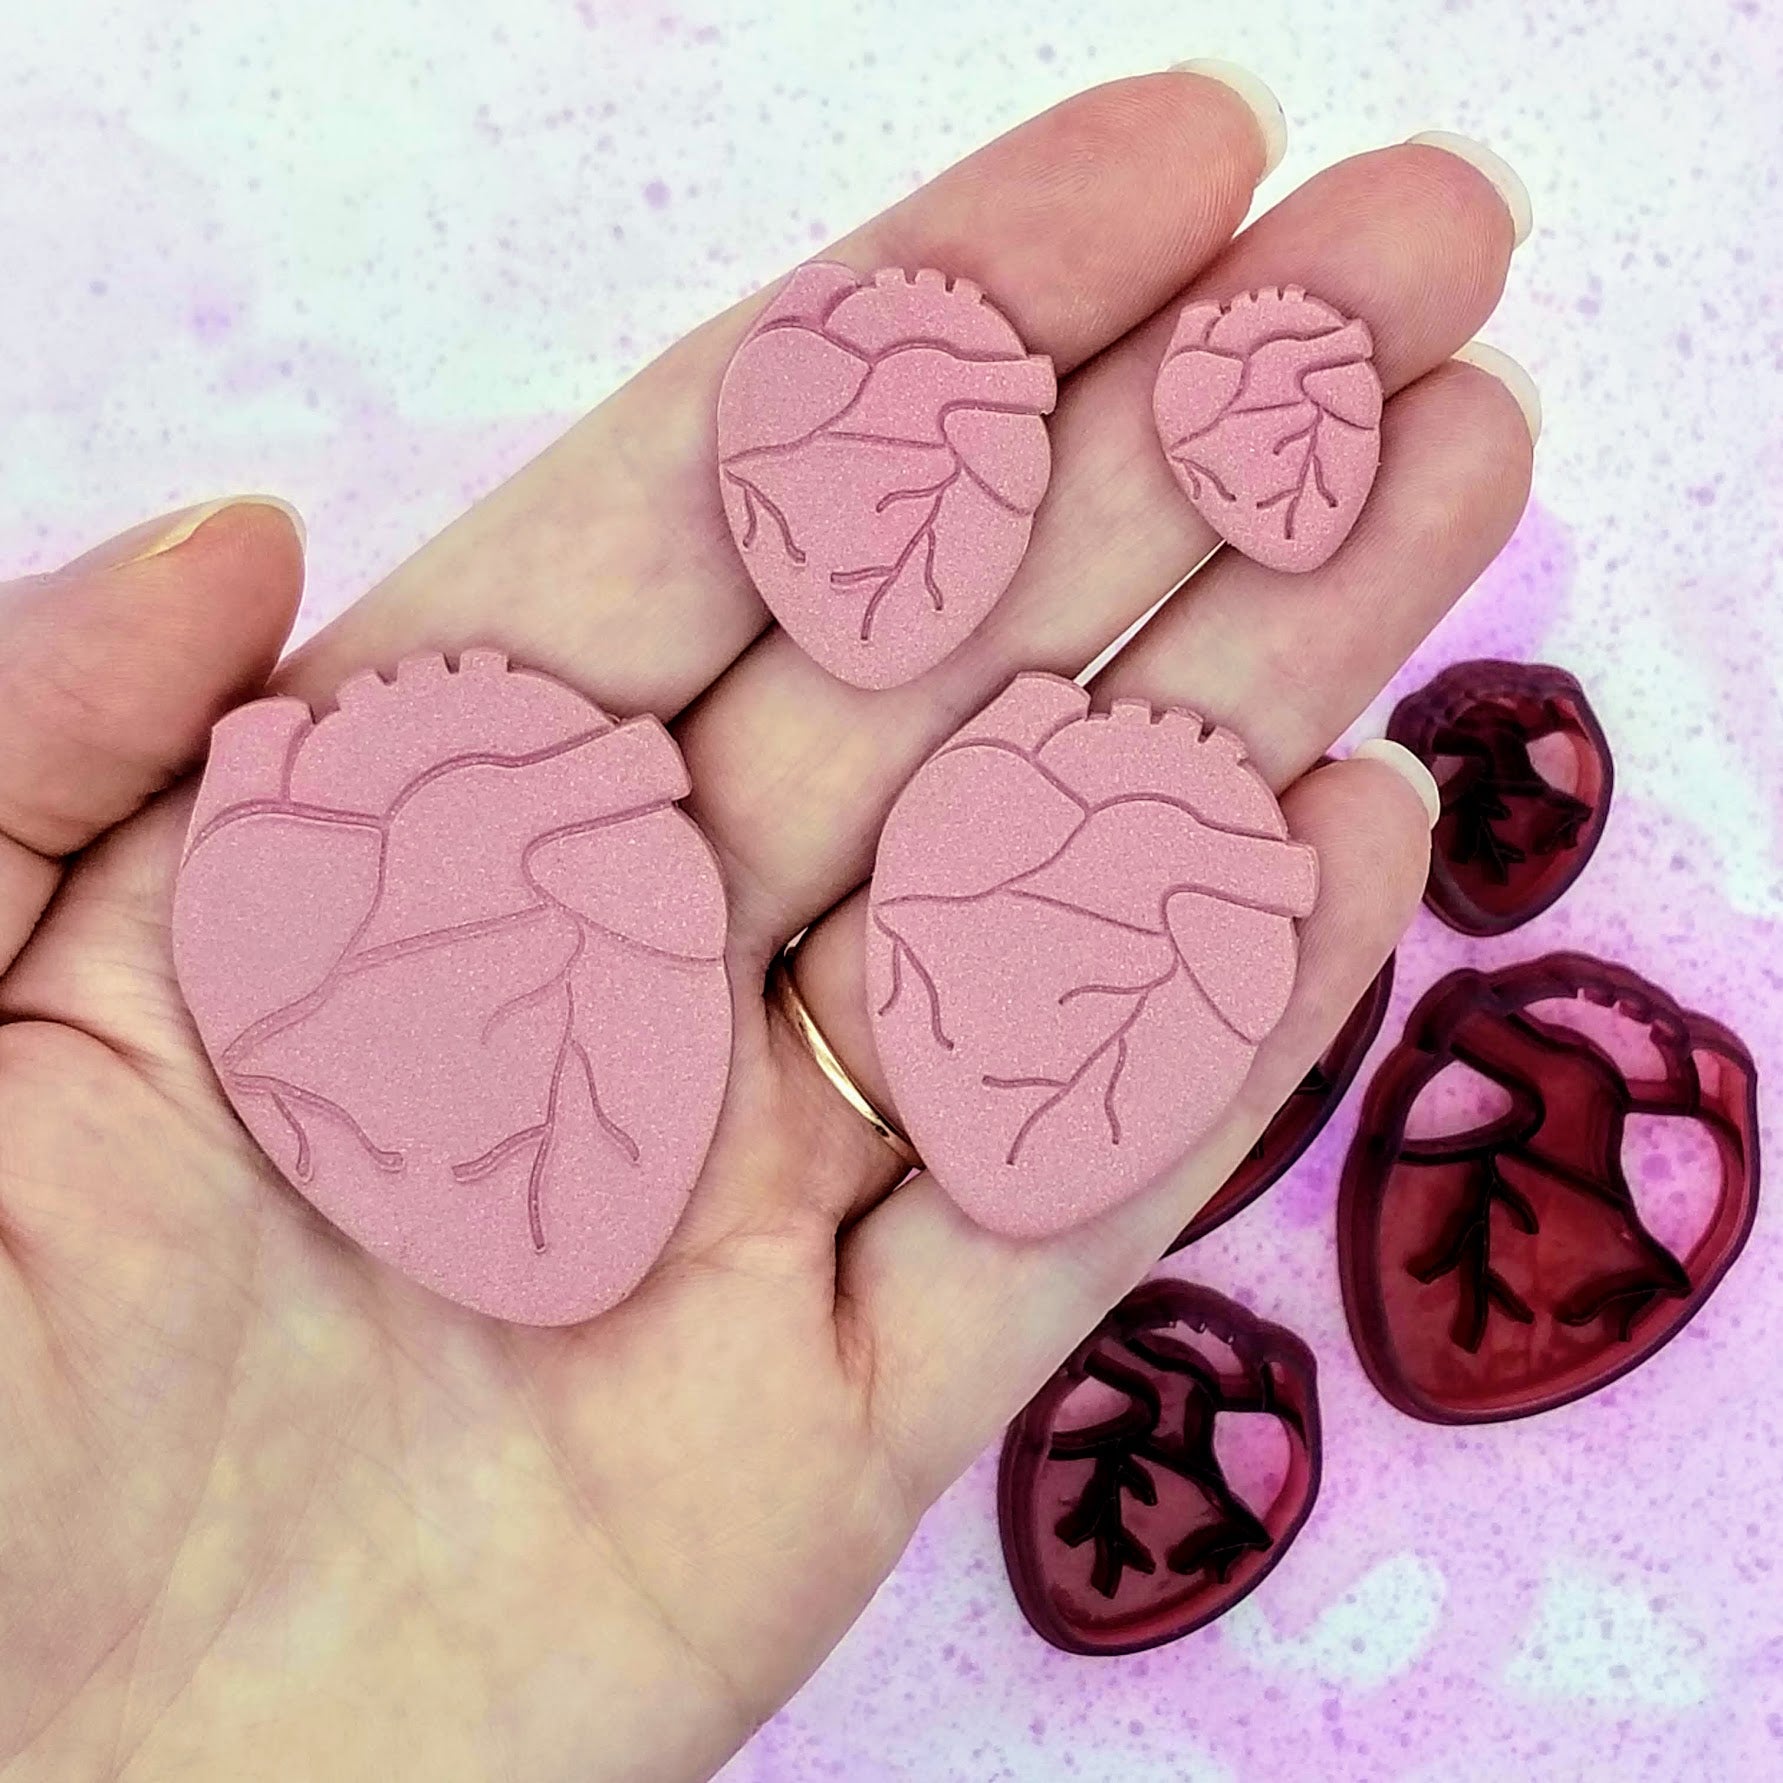 Realistic medical anatomical heart polymer clay.